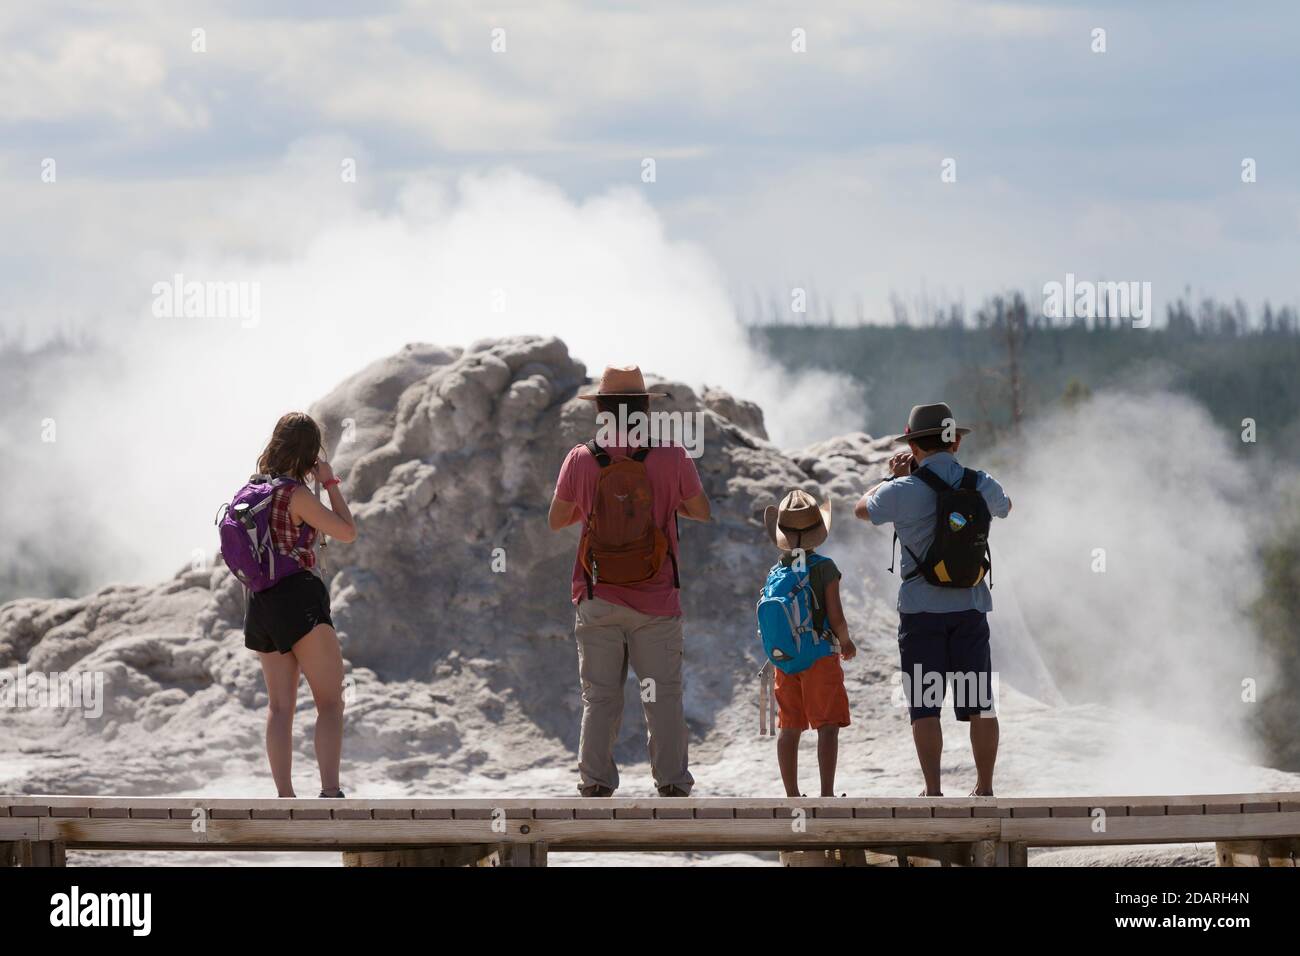 A family stops to take photos of Castle Geyser along the Upper Geyser Basin Trail in Yellowstone National Park, Wyoming on Monday, August 3, 2020. The Stock Photo